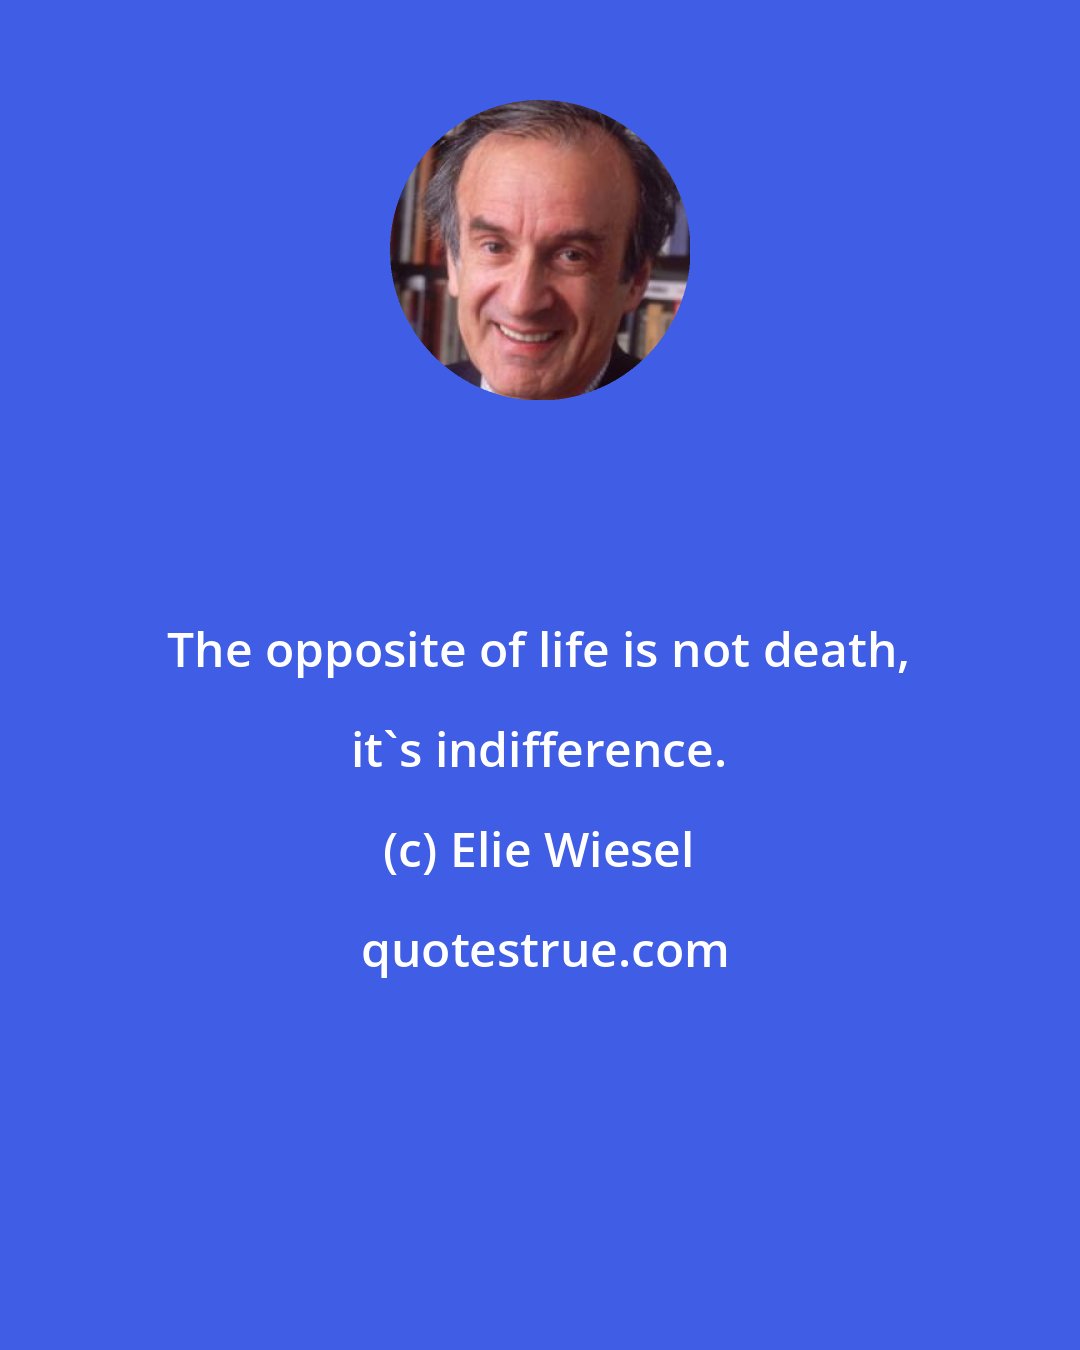 Elie Wiesel: The opposite of life is not death, it's indifference.